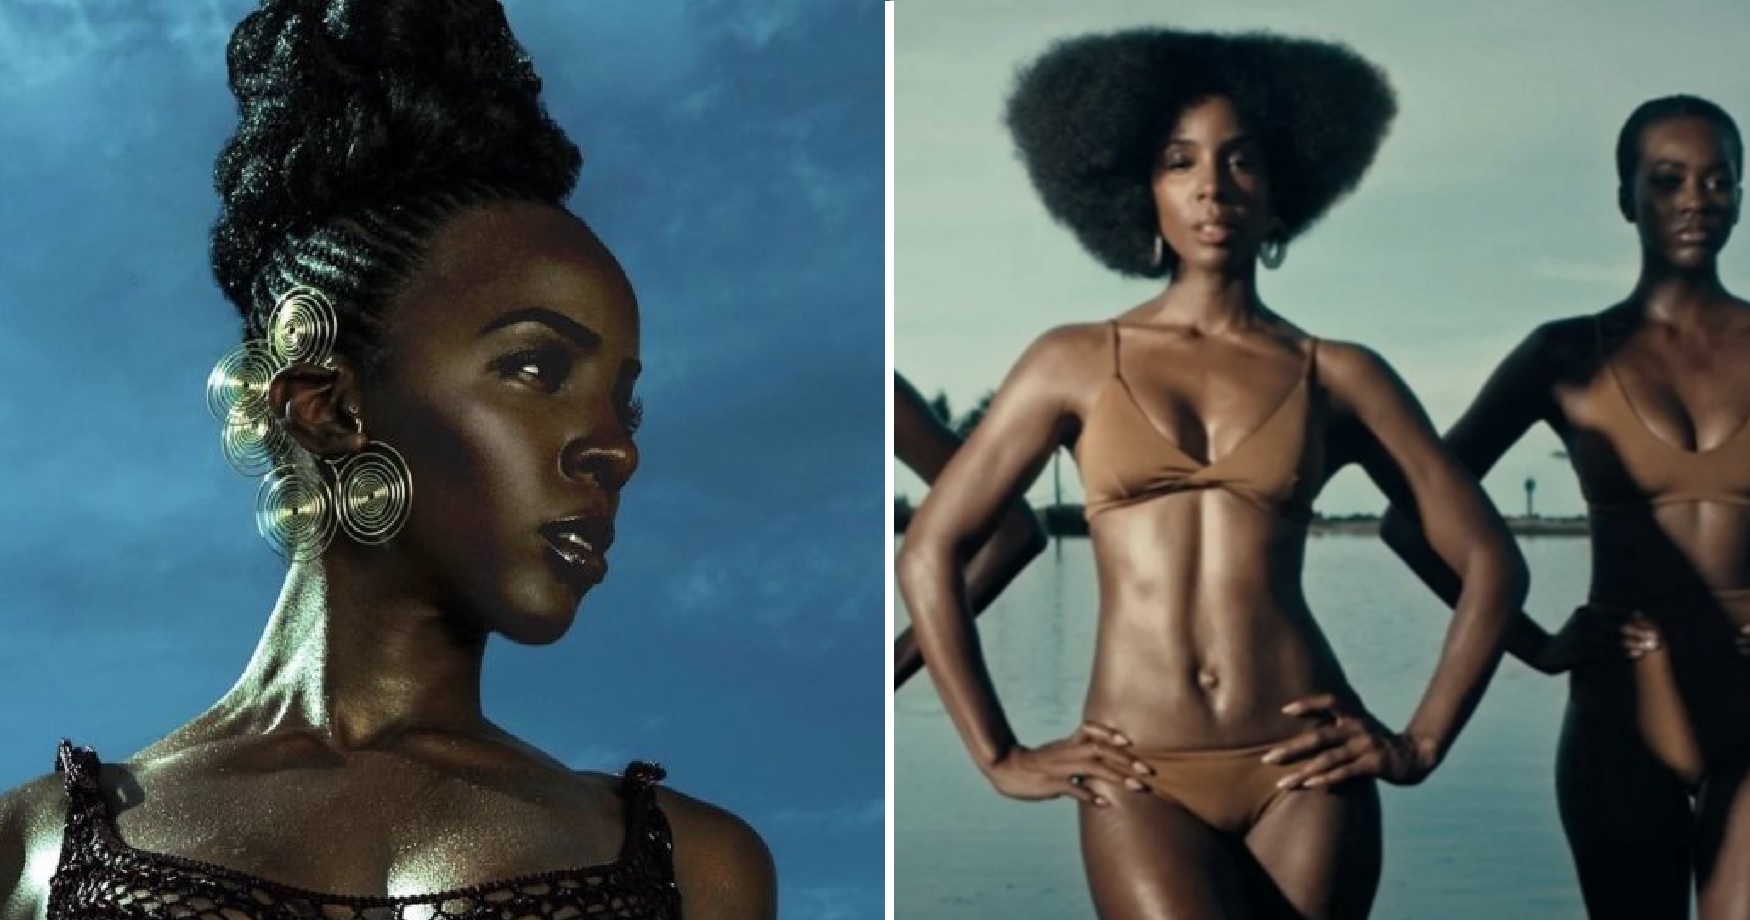 Did You Miss It? Check Out Kelly Rowland’s STUNNING Music Video For ‘Coffee’